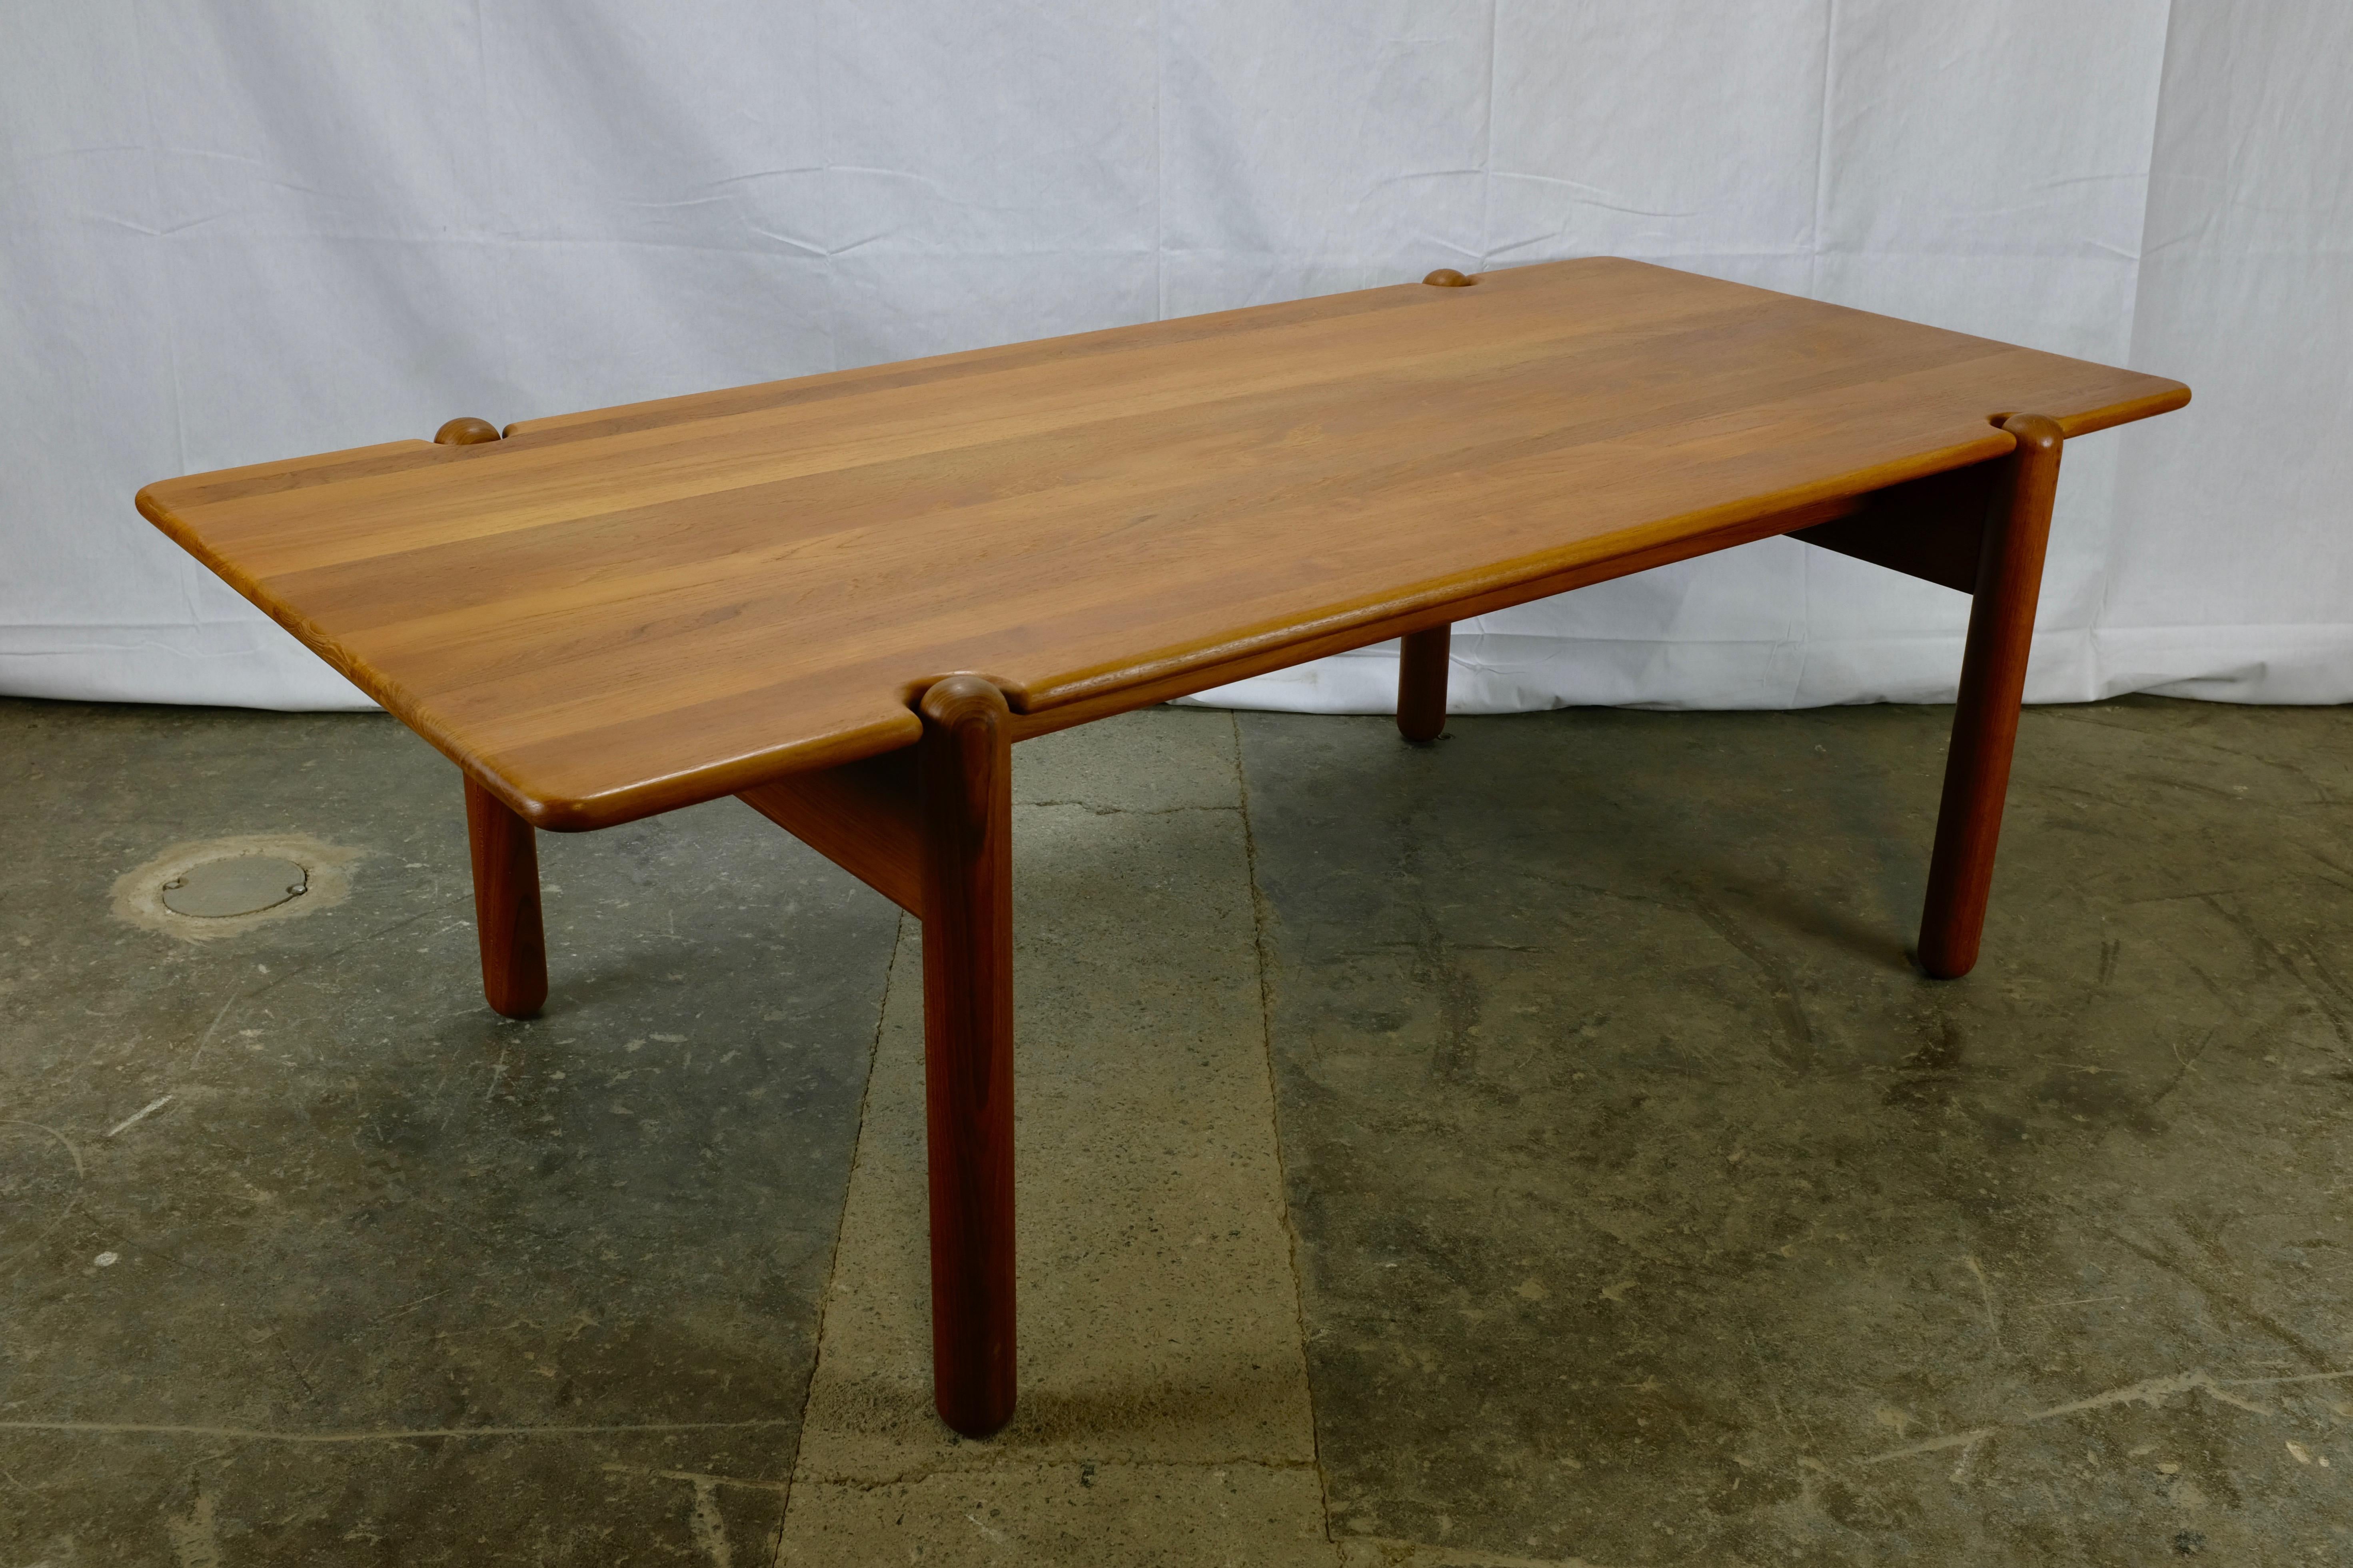 This Danish made coffee table features a solid teak top and the distinctive detail of round legs that project through the top. The length of the table makes it an excellent piece to anchor a living room in front of a sofa.

The top features a